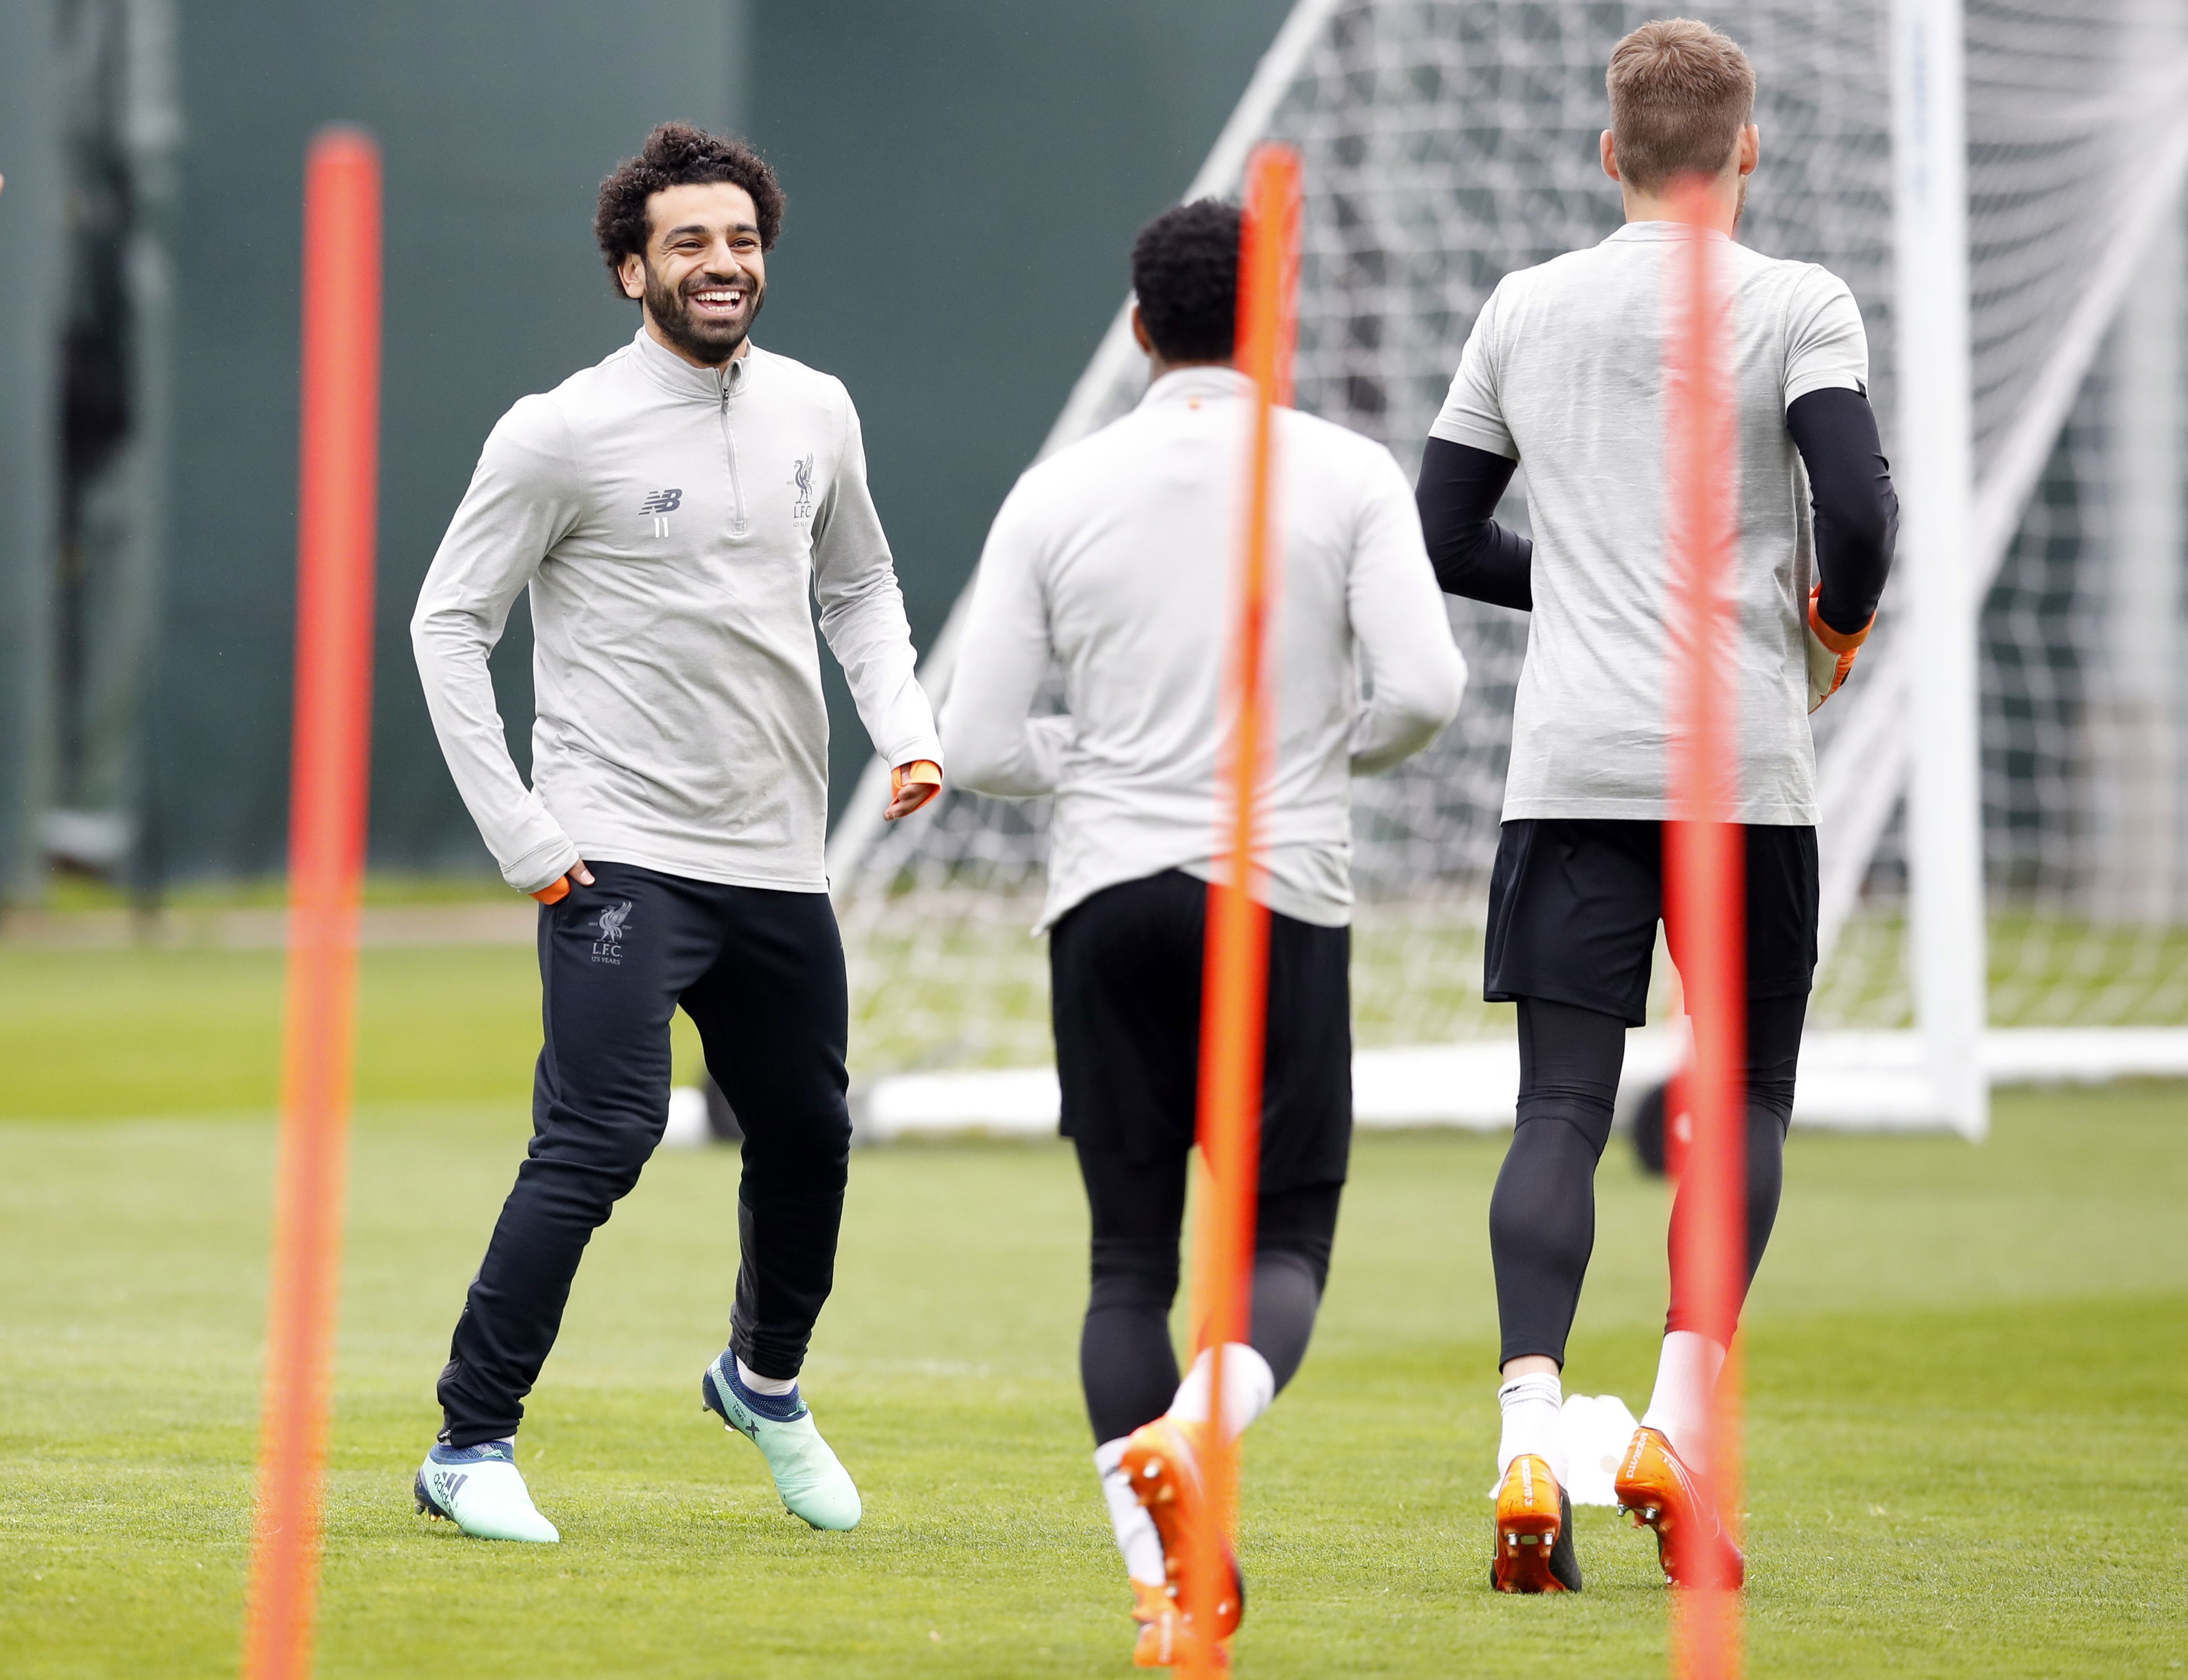 Liverpool's Mohamed Salah (left) with team mates during a training session at Melwood Training Ground, Liverpool. PRESS ASSOCIATION Photo. Picture date: Monday April 23, 2018. See PA story SOCCER Liverpool. Photo credit should read: Martin Rickett/PA Wire